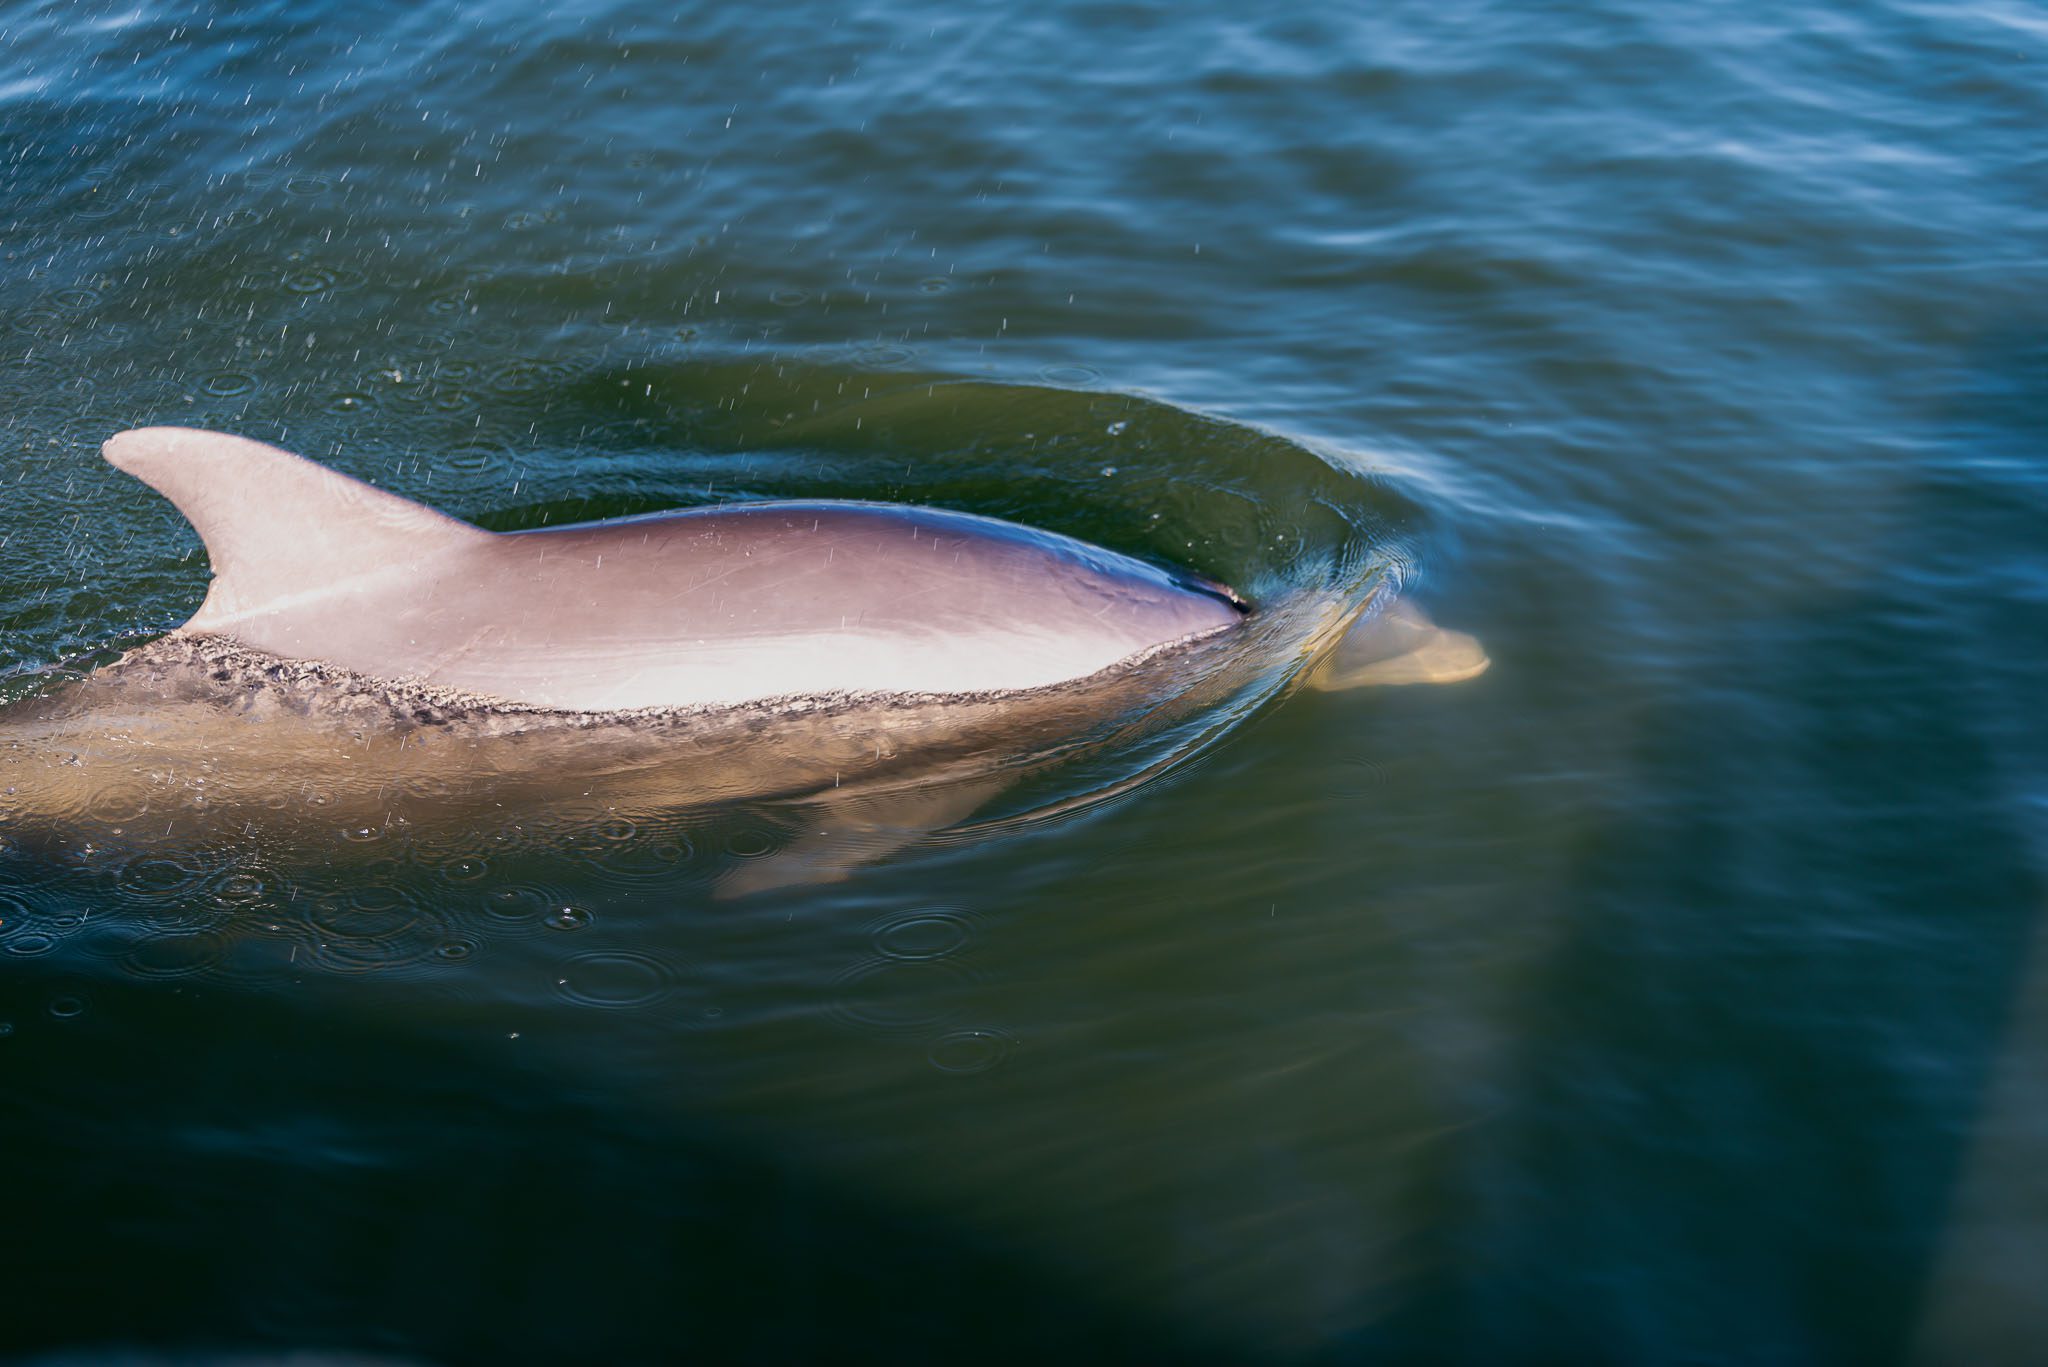 Bottlenose dolphin swimming in the clear waters of Canaveral National Seashore.